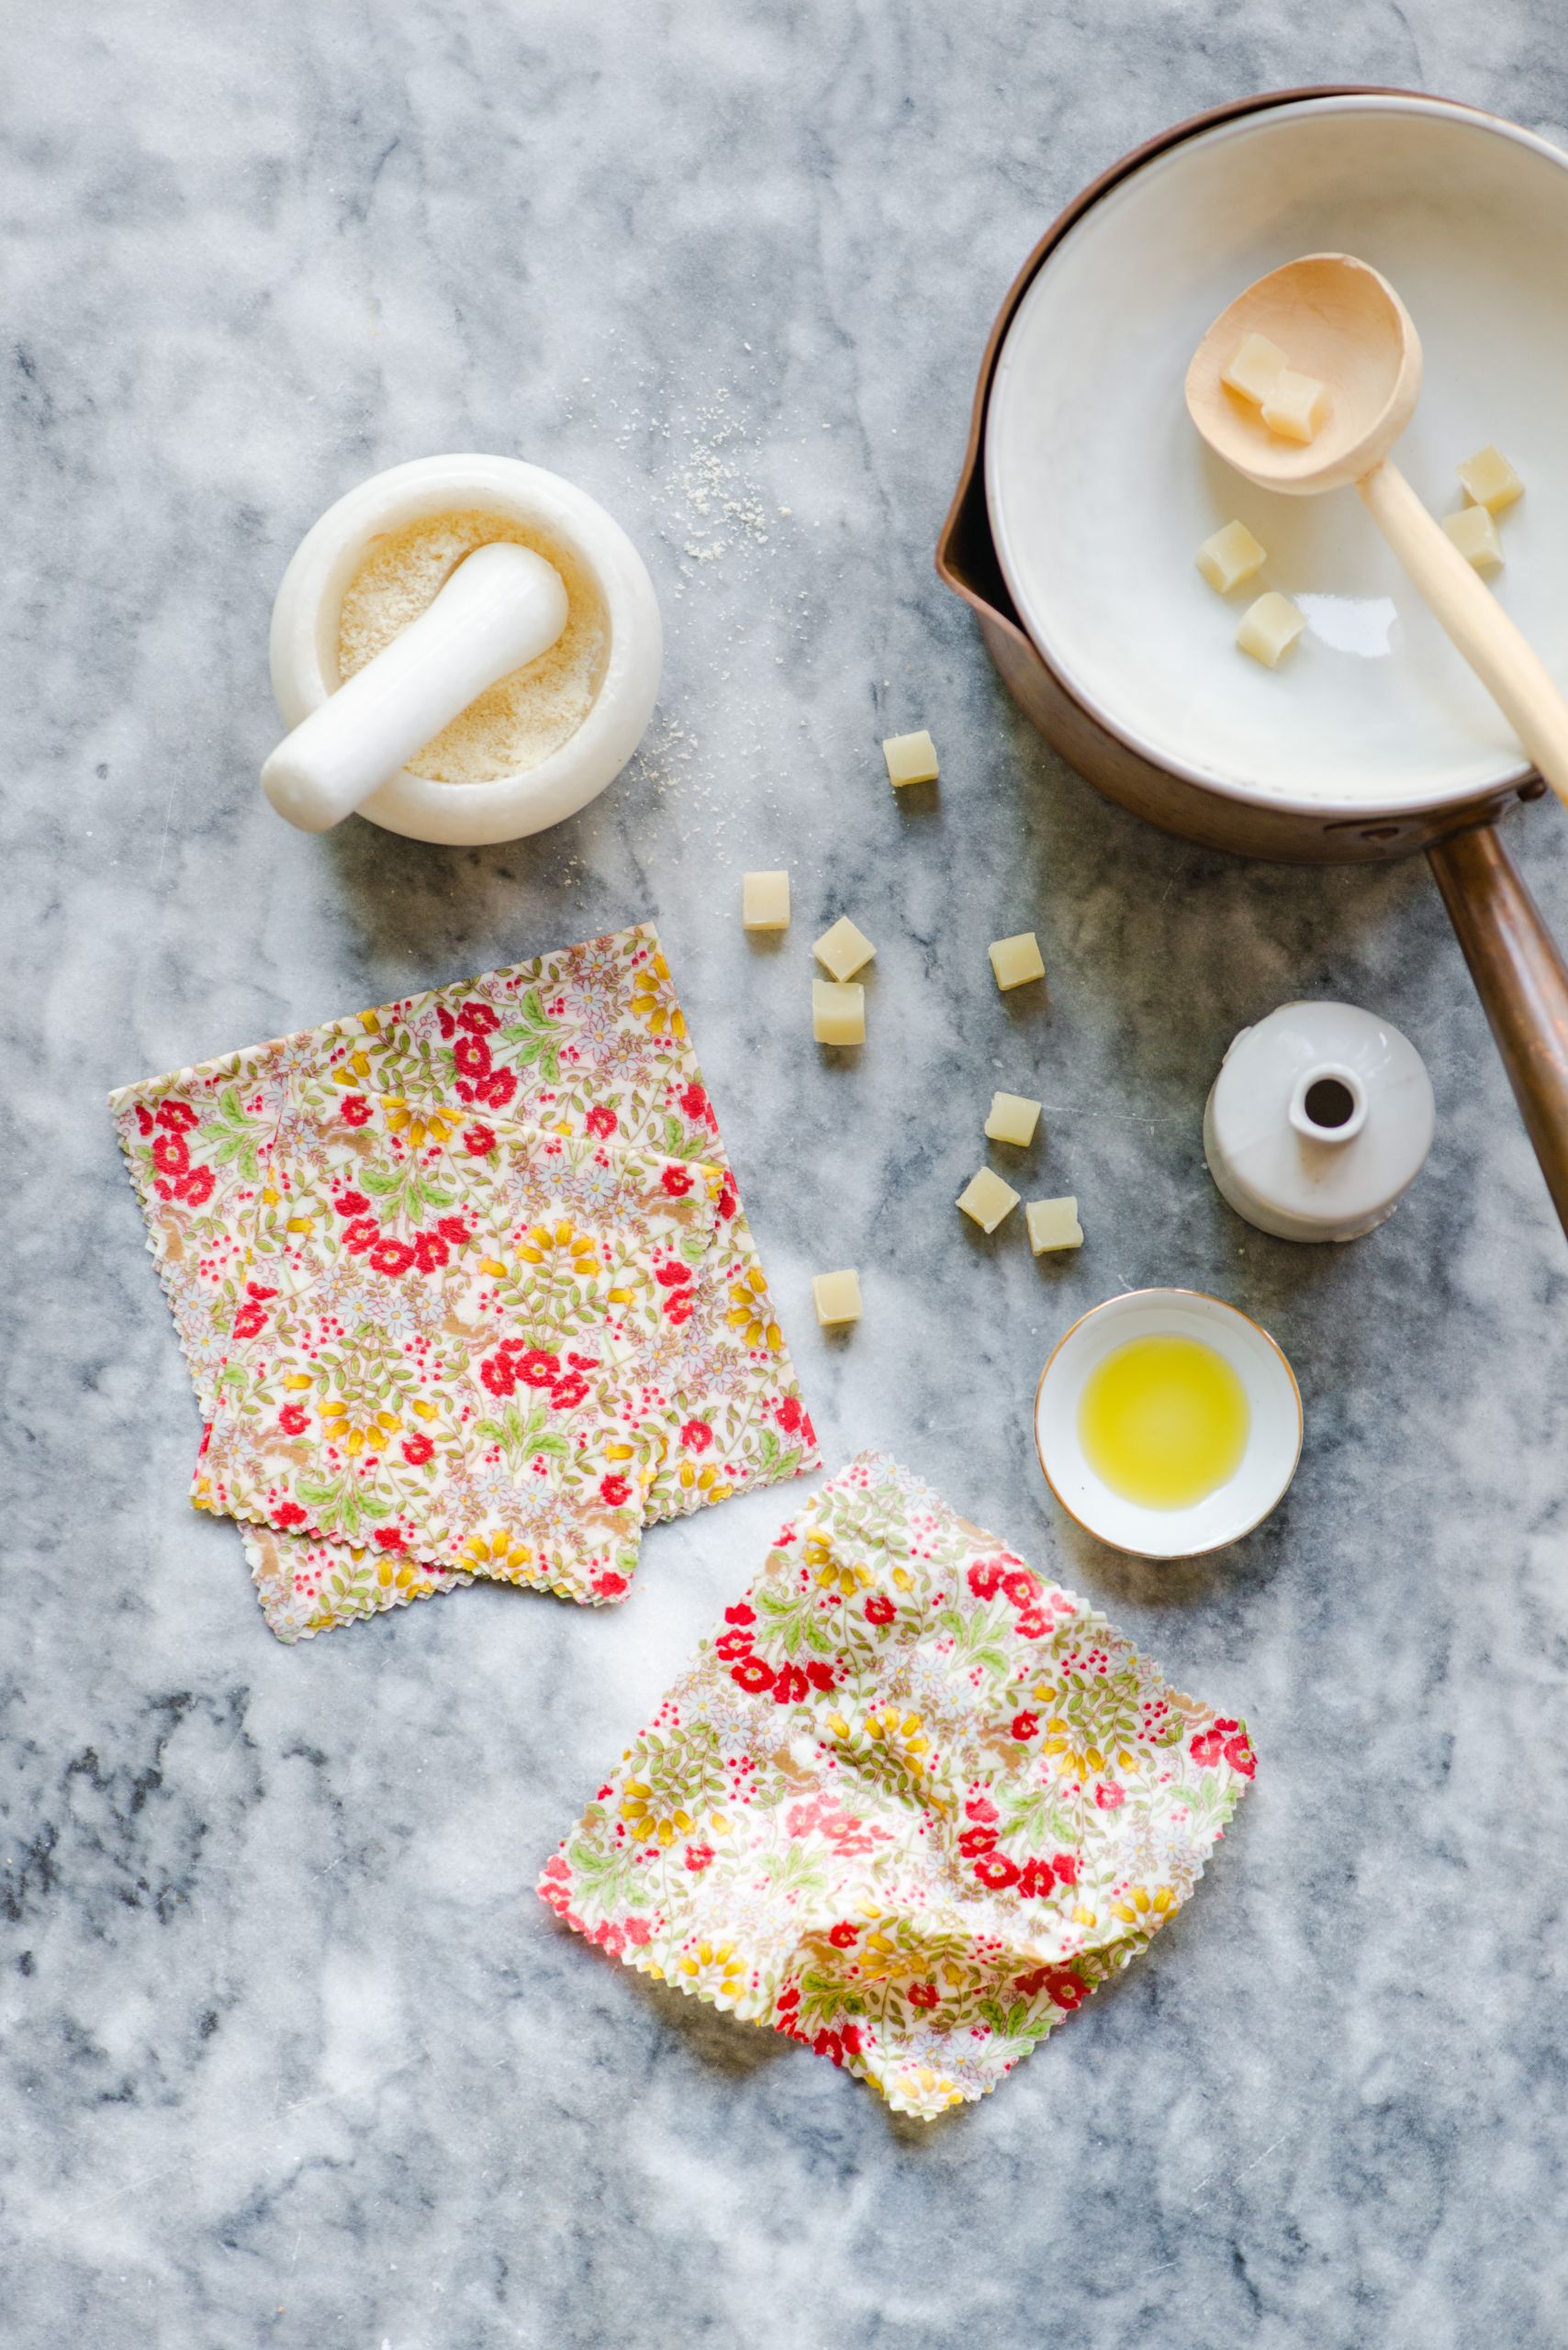 marble table with two colorful beeswax wraps, bowls and mortar